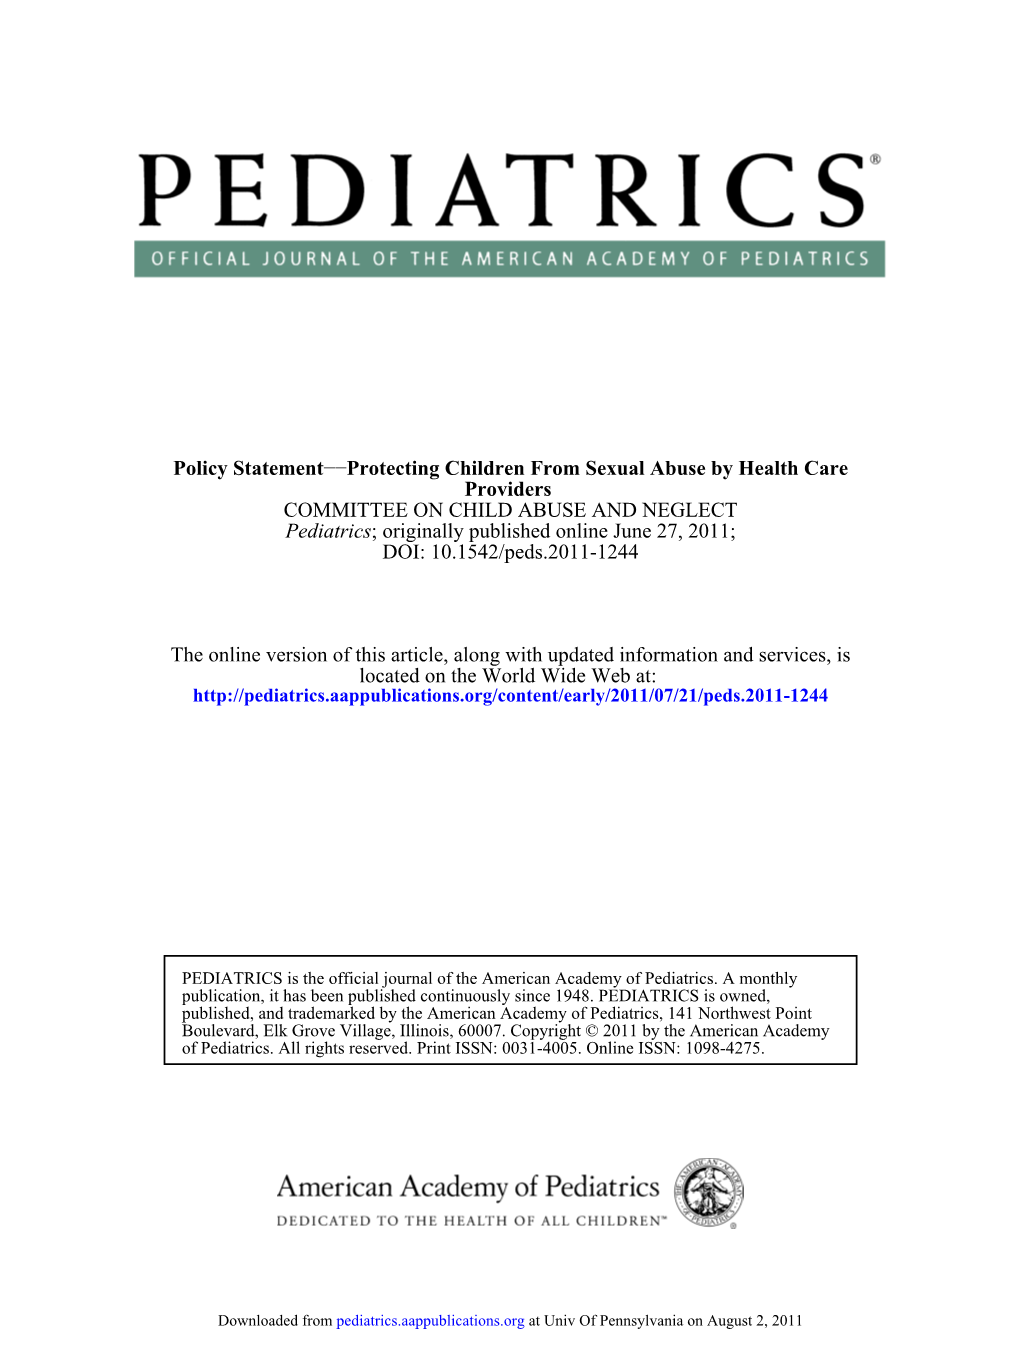 DOI: 10.1542/Peds.2011-1244 ; Originally Published Online June 27, 2011; Pediatrics COMMITTEE on CHILD ABUSE and NEGLECT Provide